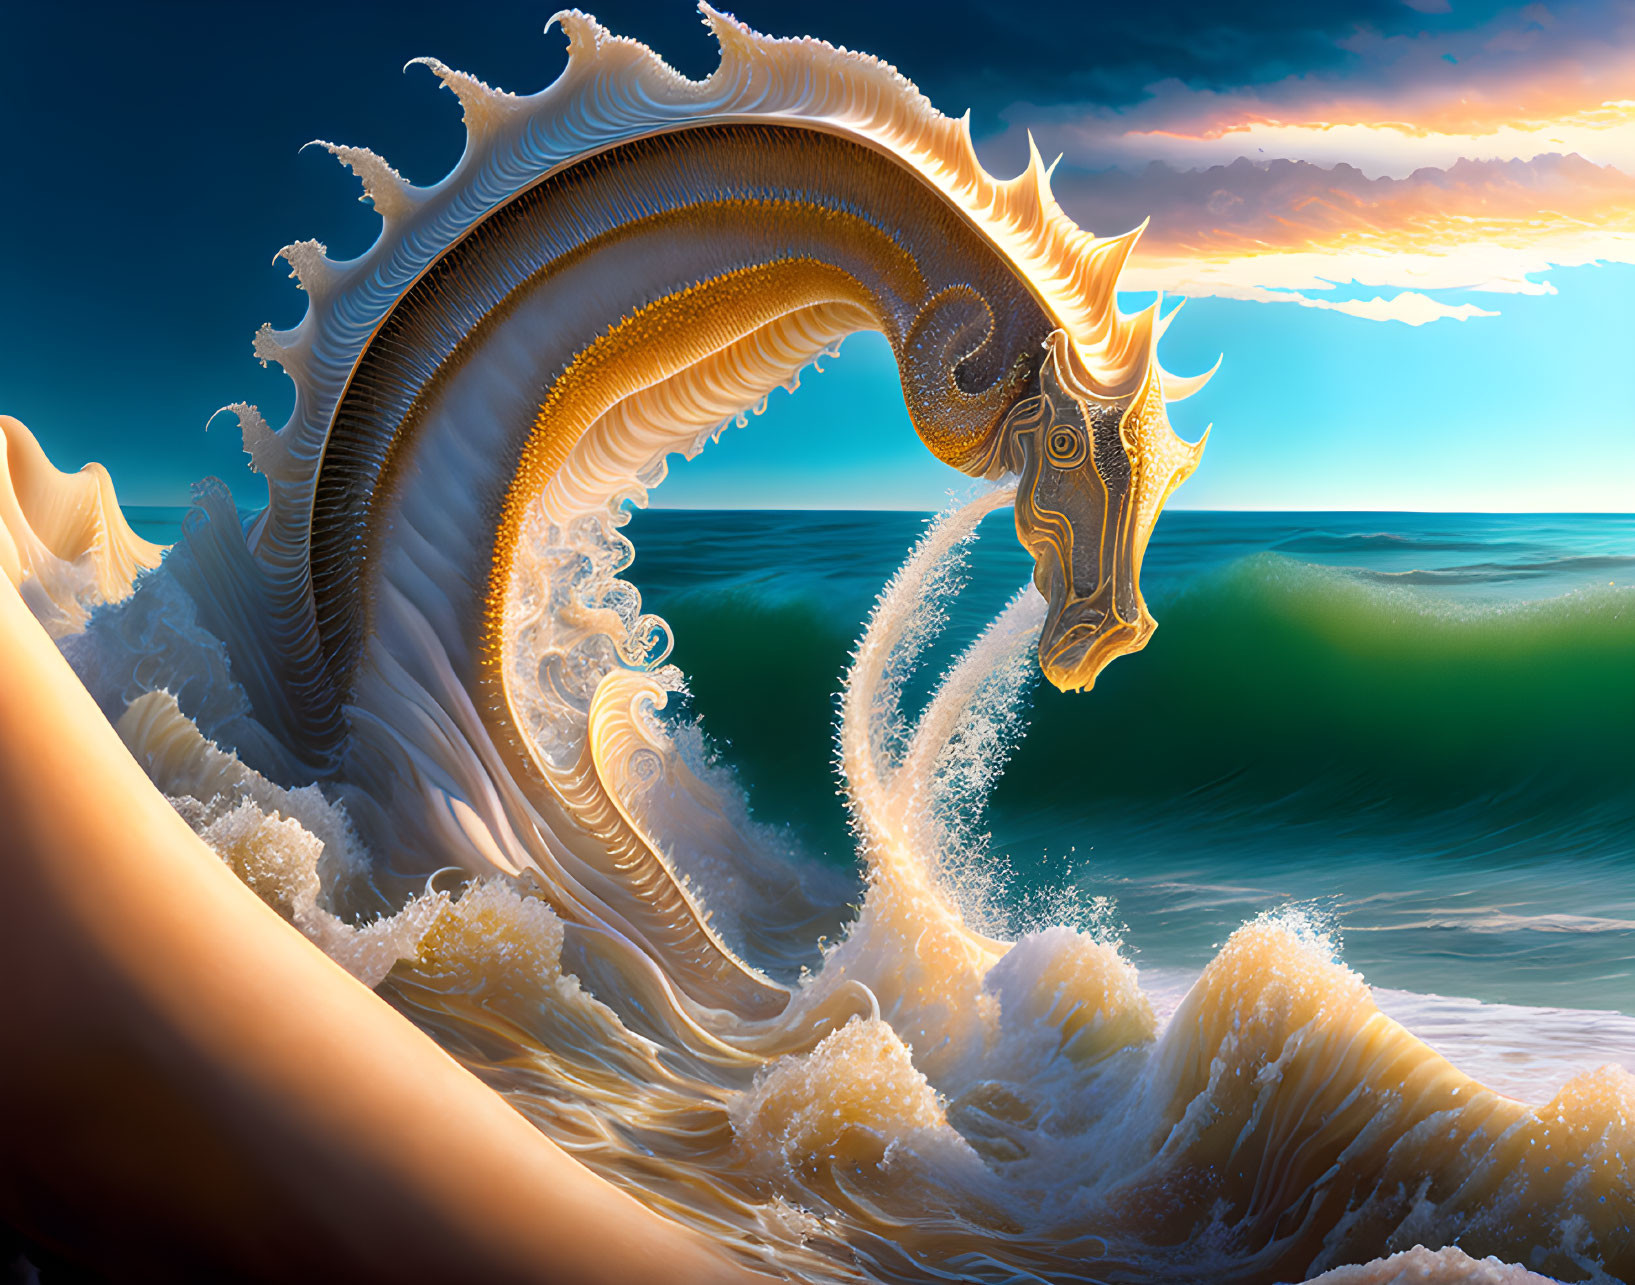 Majestic seahorse with wave-like features under sunset sky